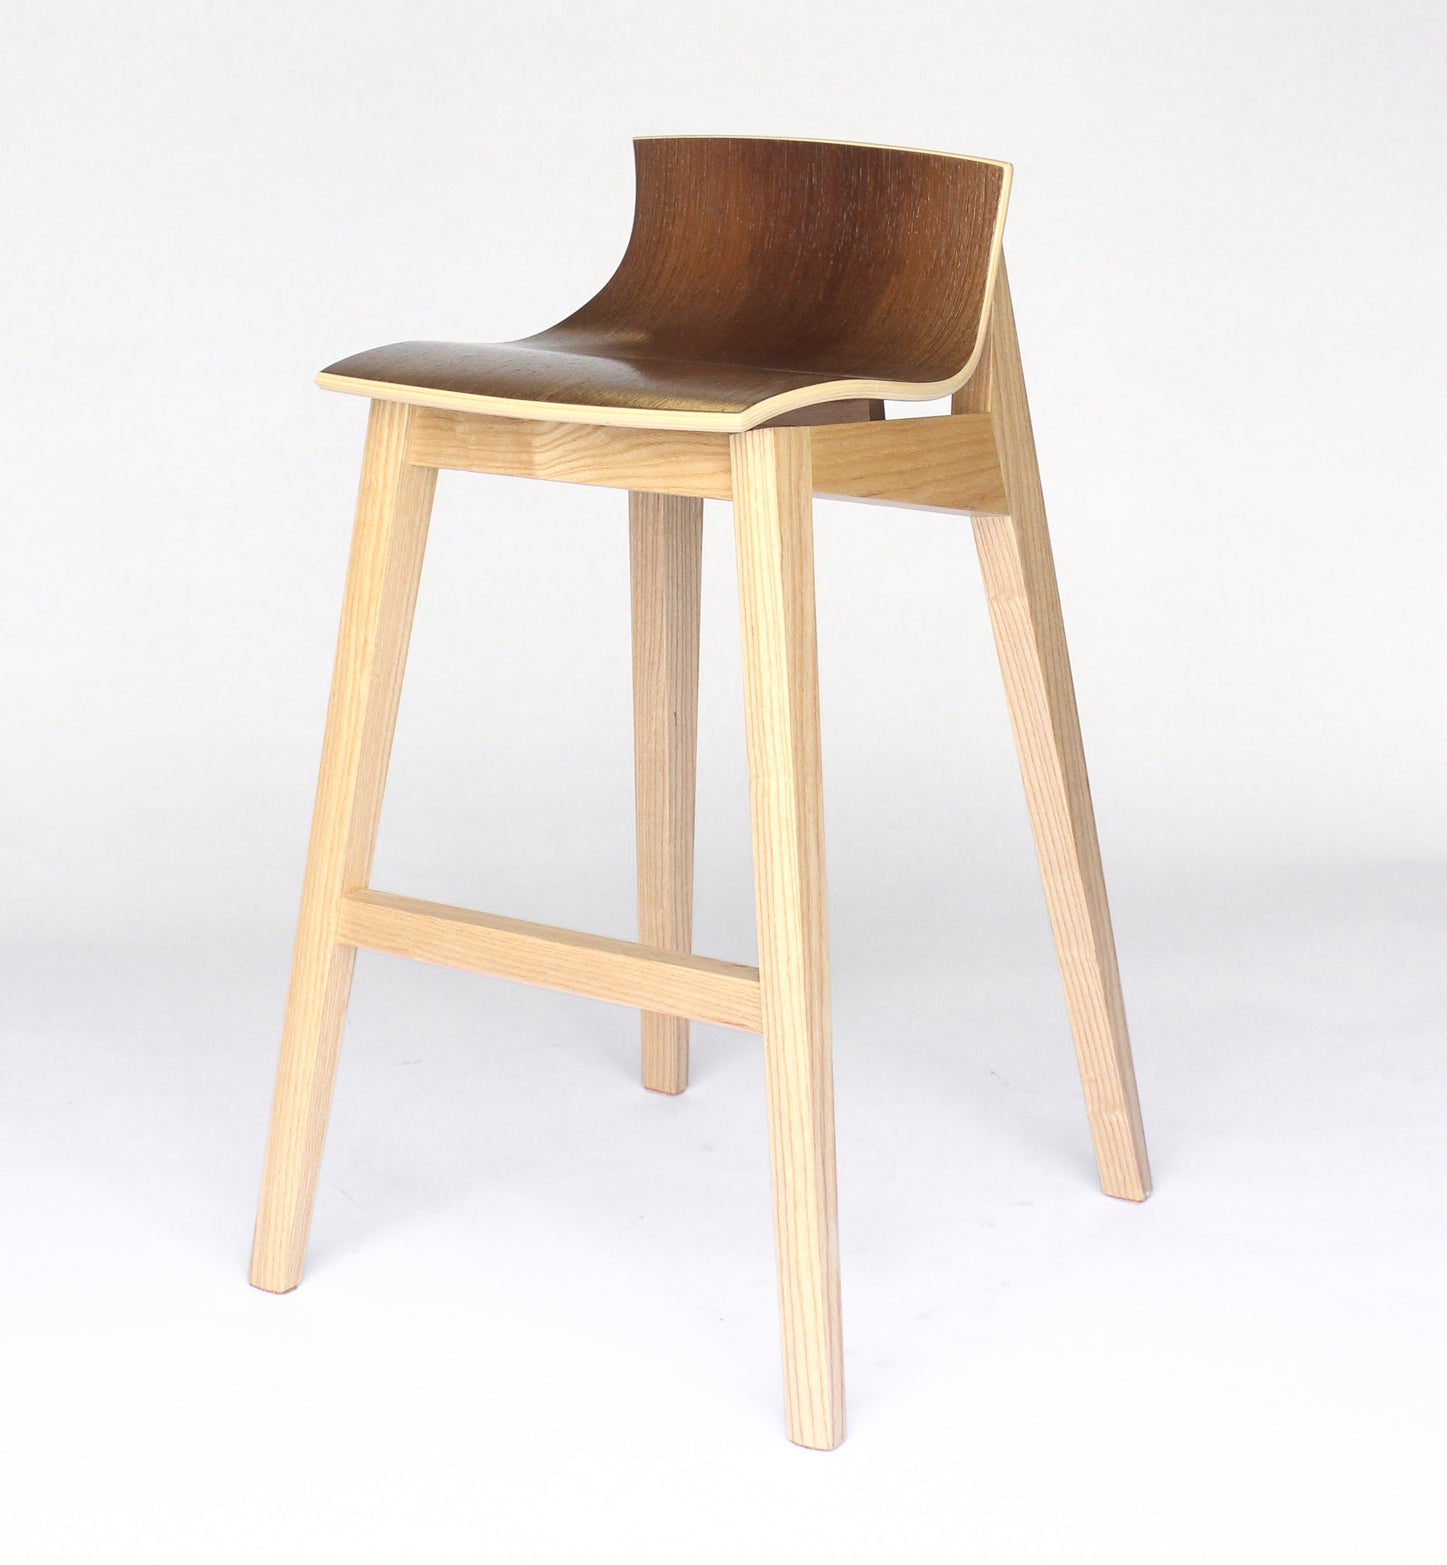 Stella midcentury modern ash wood Stool handcrafted by Hunt & Noyer in Michigan